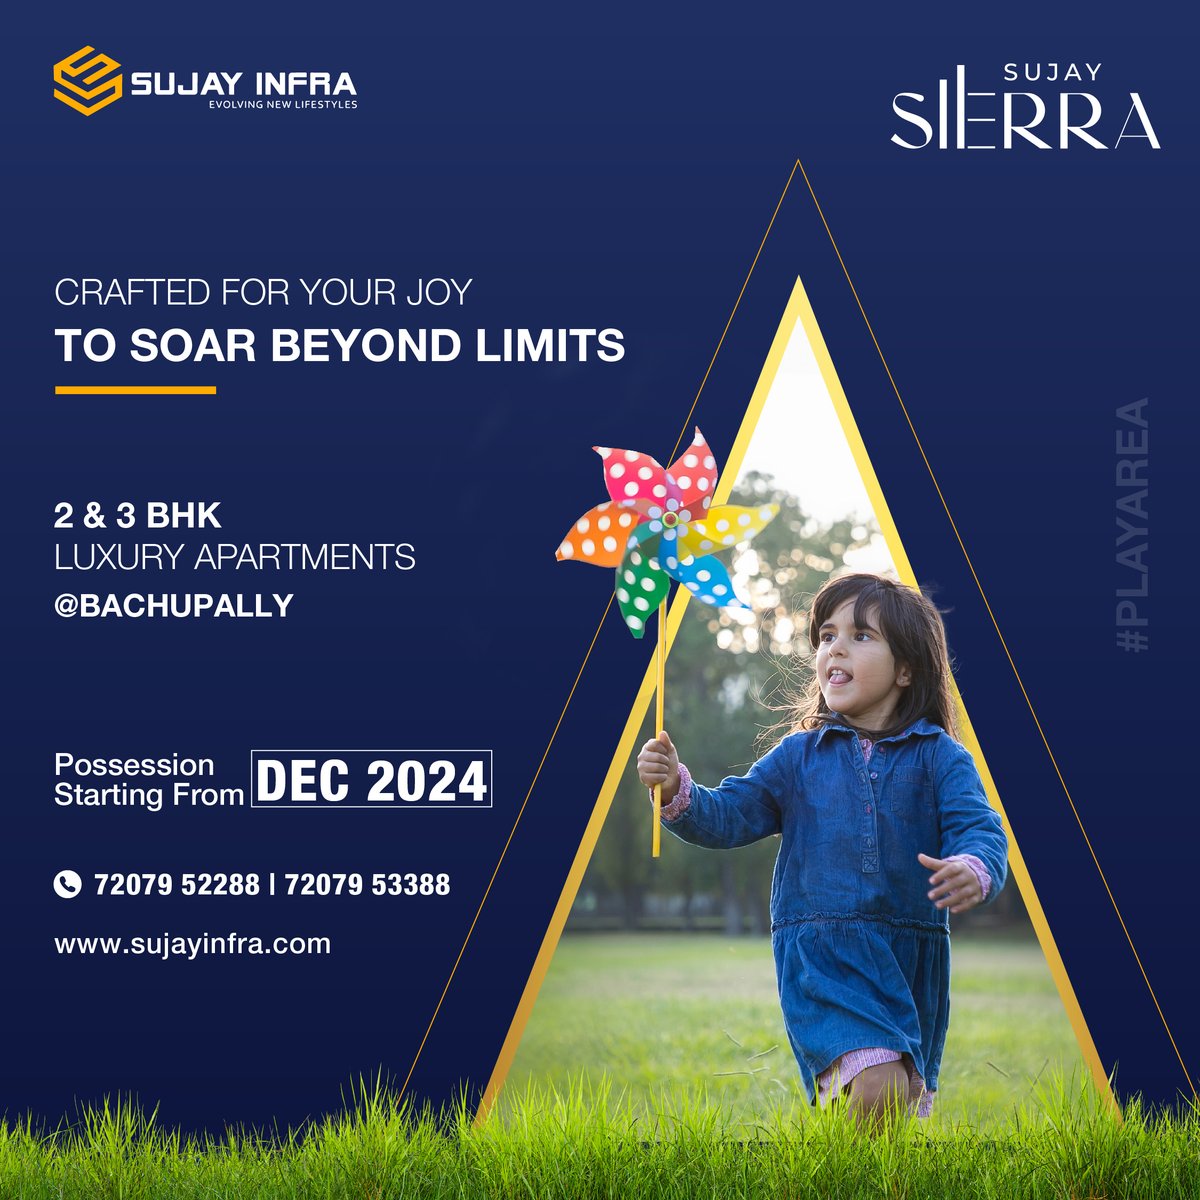 Get ready to start living the high life in the most happening suburb. Shaped with magnificent amenities and awe-inspiring architecture this home is bound to boost your standard of living.

#sujayinfra #bachupally #apartmentliving #luxuryflatsforsale #flatsinhyderabad